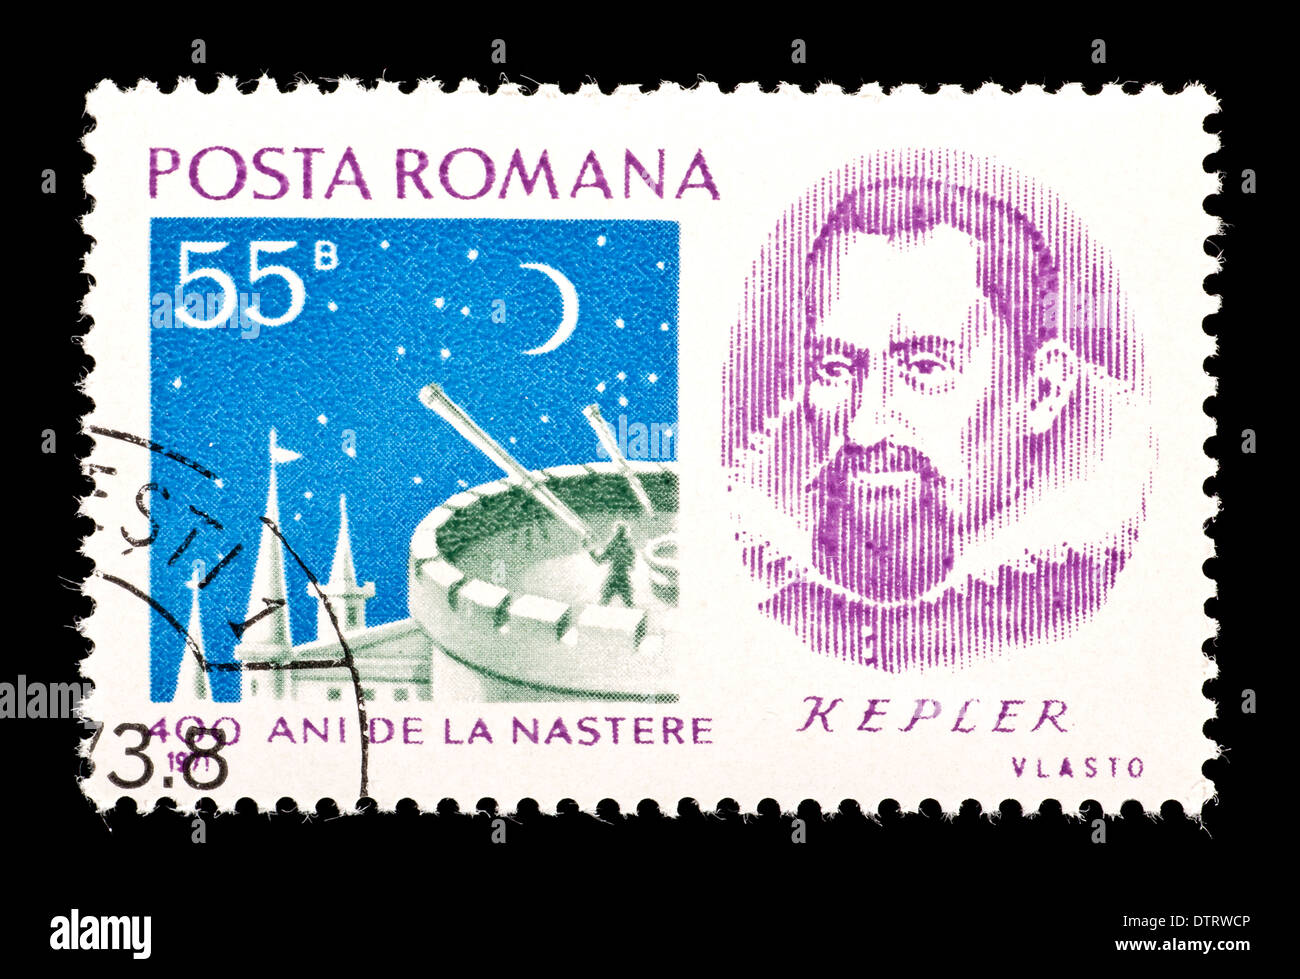 Postage stamp from Romania depicting Johannes Kepler and astronomical observation tower. Stock Photo